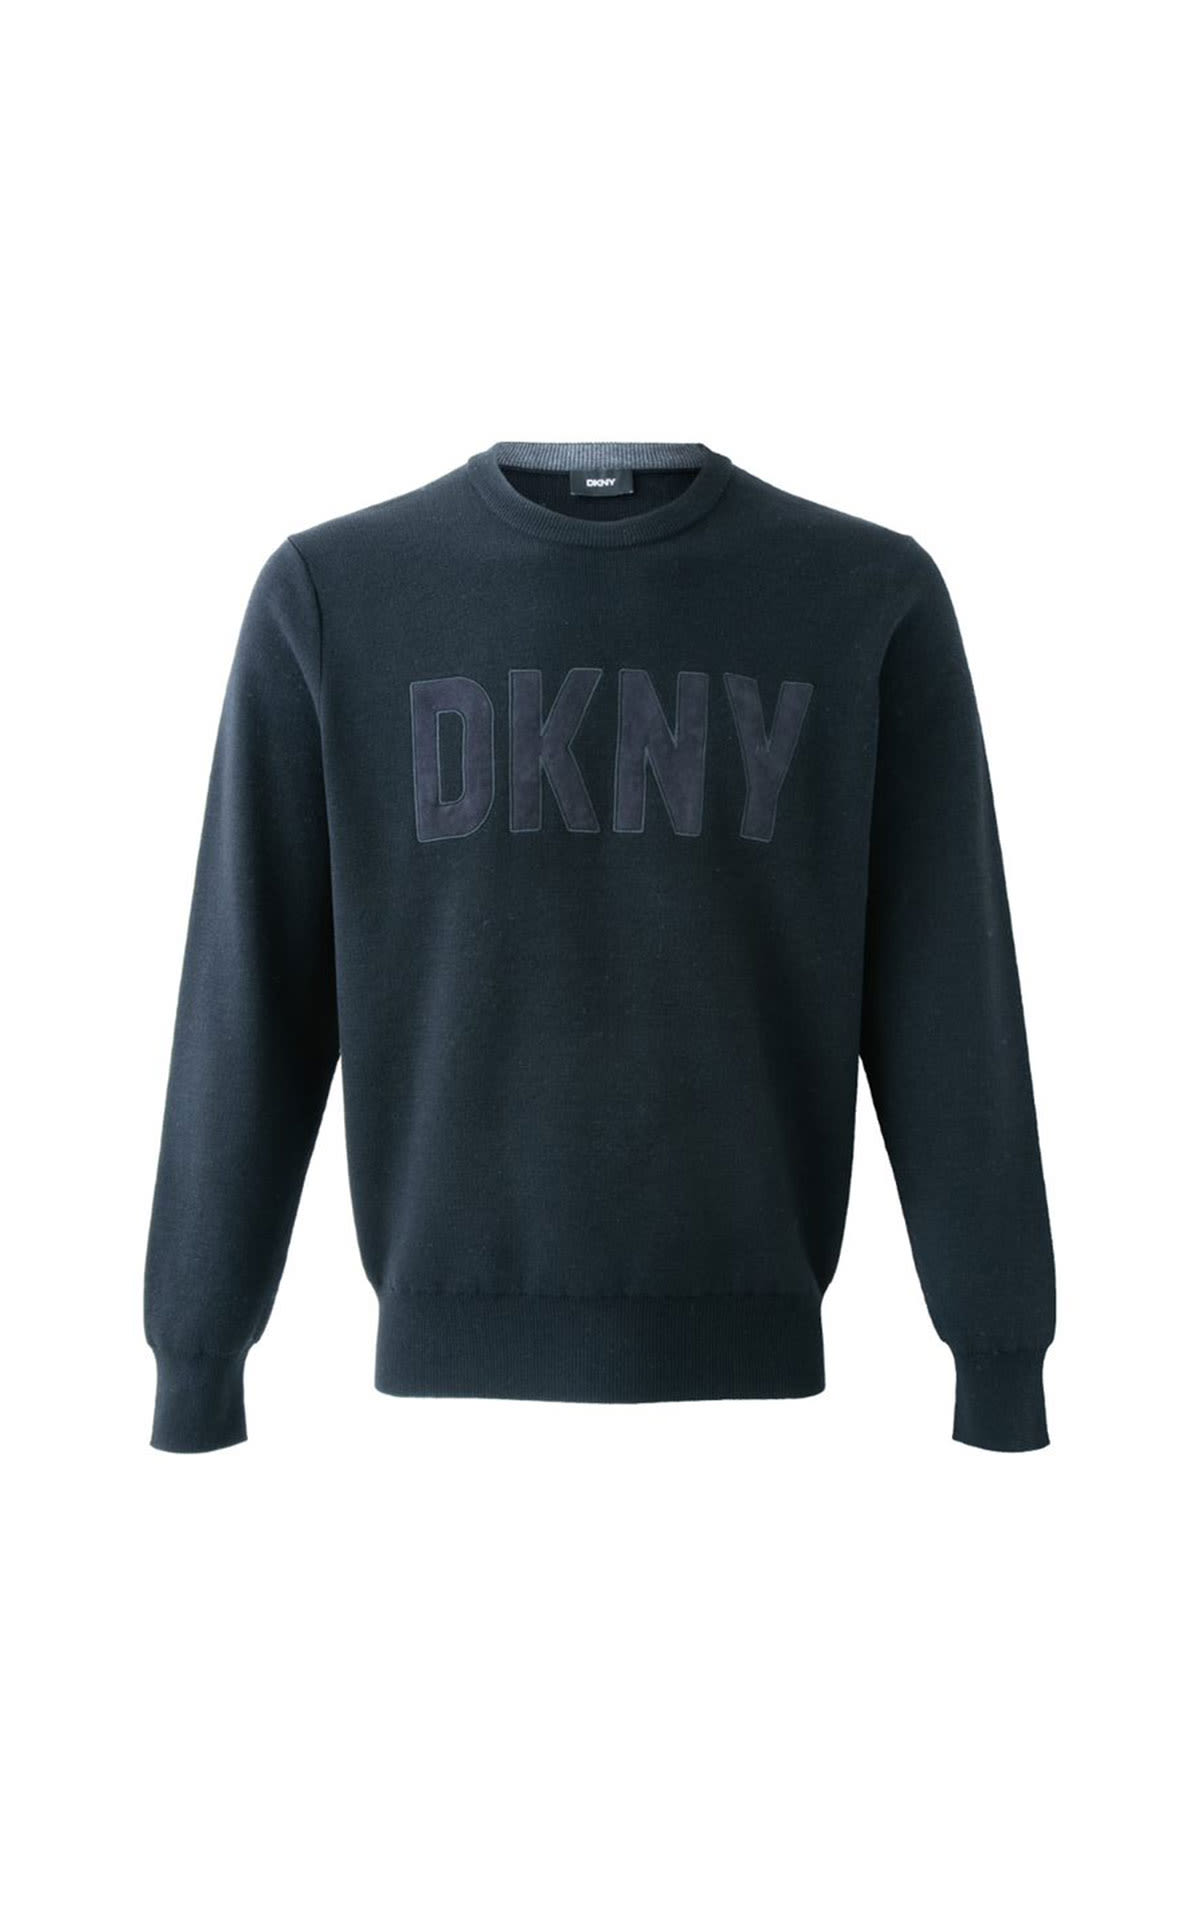 DKNY Chenille logo crew from Bicester Village